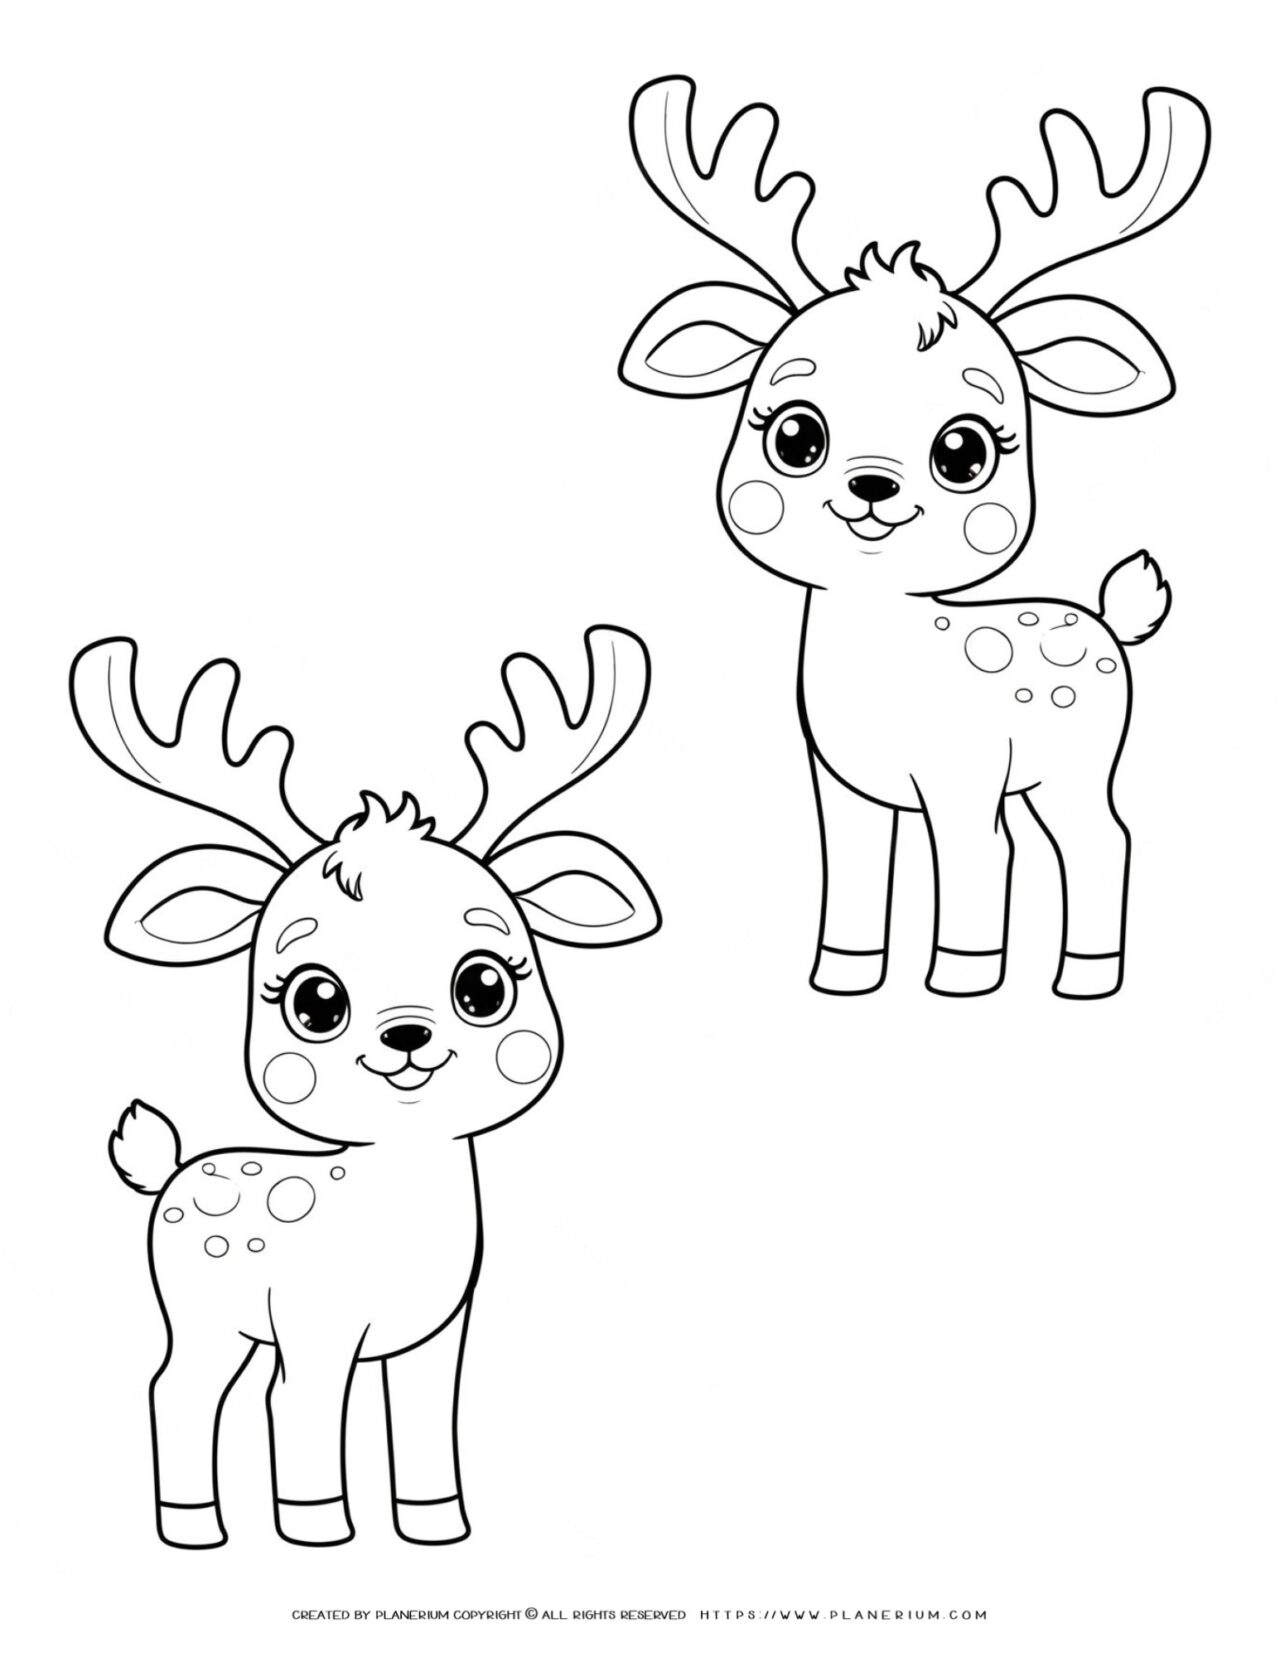 two-cute-happy-reindeer-outline-coloring-page-for-kids